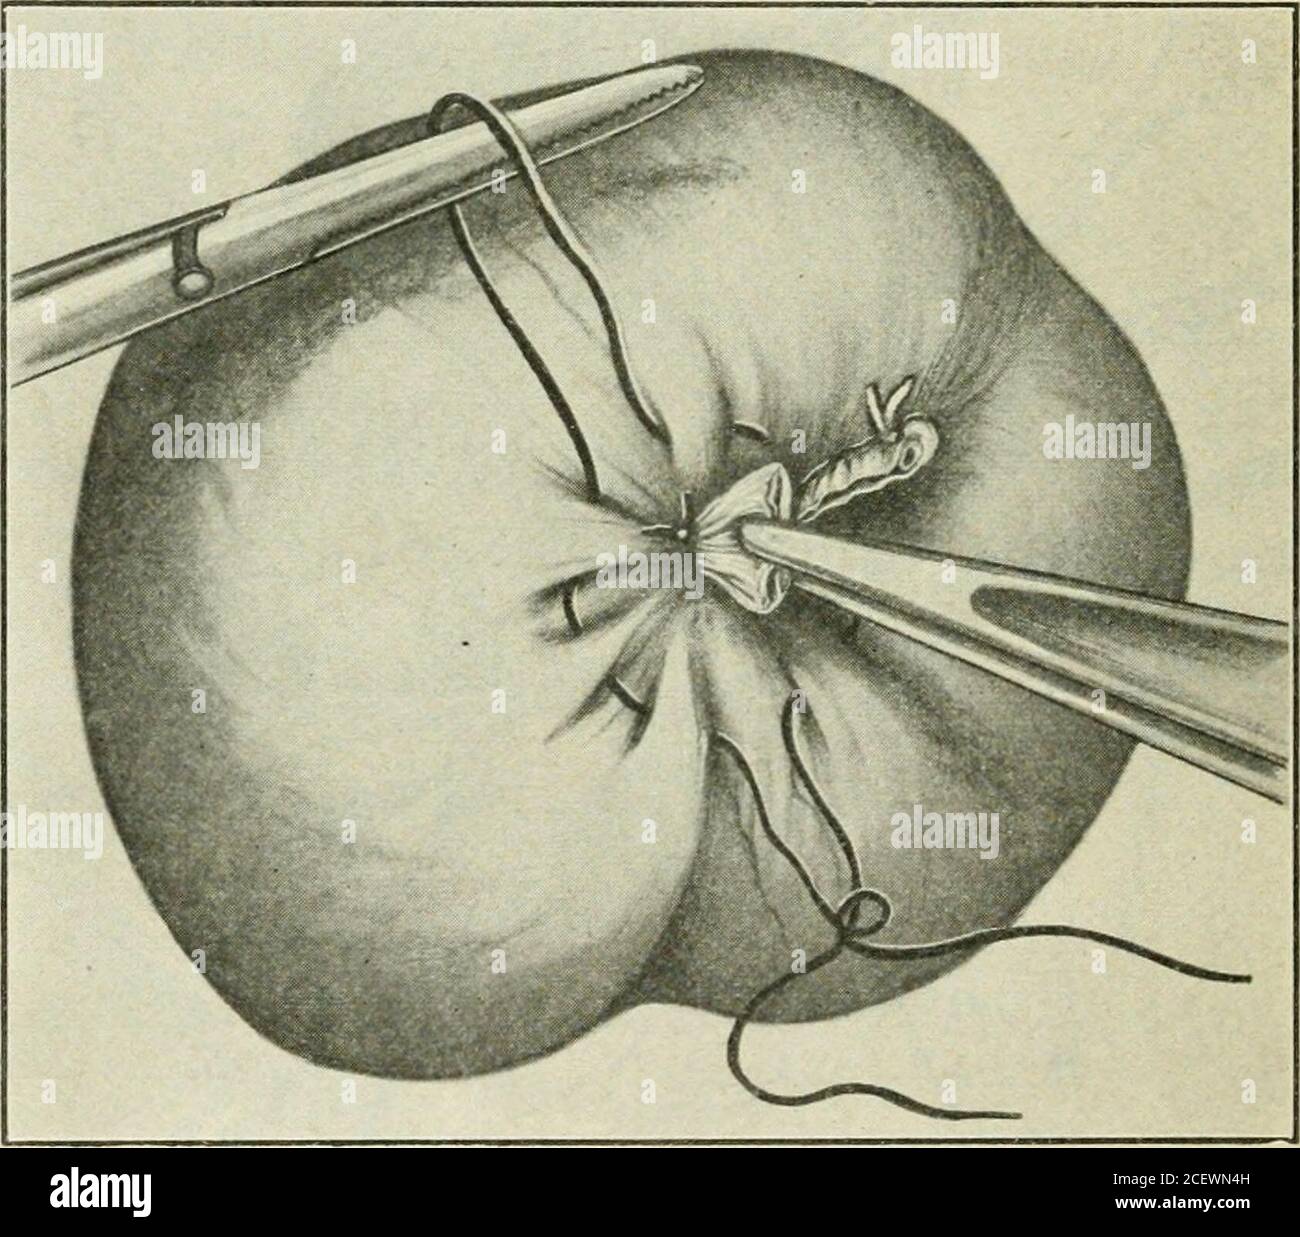 a manual of gyncology and pelvic surgery for students and practitioners fig 254the purse string suture laid the base of the appendix crushed aplain catgut ligature in position to tie around the crushed portion many methods of managing the stump have been devisedligation of the base amputation of the appendix andcauterization of the exposed mucosa being the simplest andthis may be practised with satisfaction whenever drainage must 552 diseases associated with gynecologic lesions be employed according to some good authorities the samesimple treatment is perfectly adequate in all 2CEWN4H